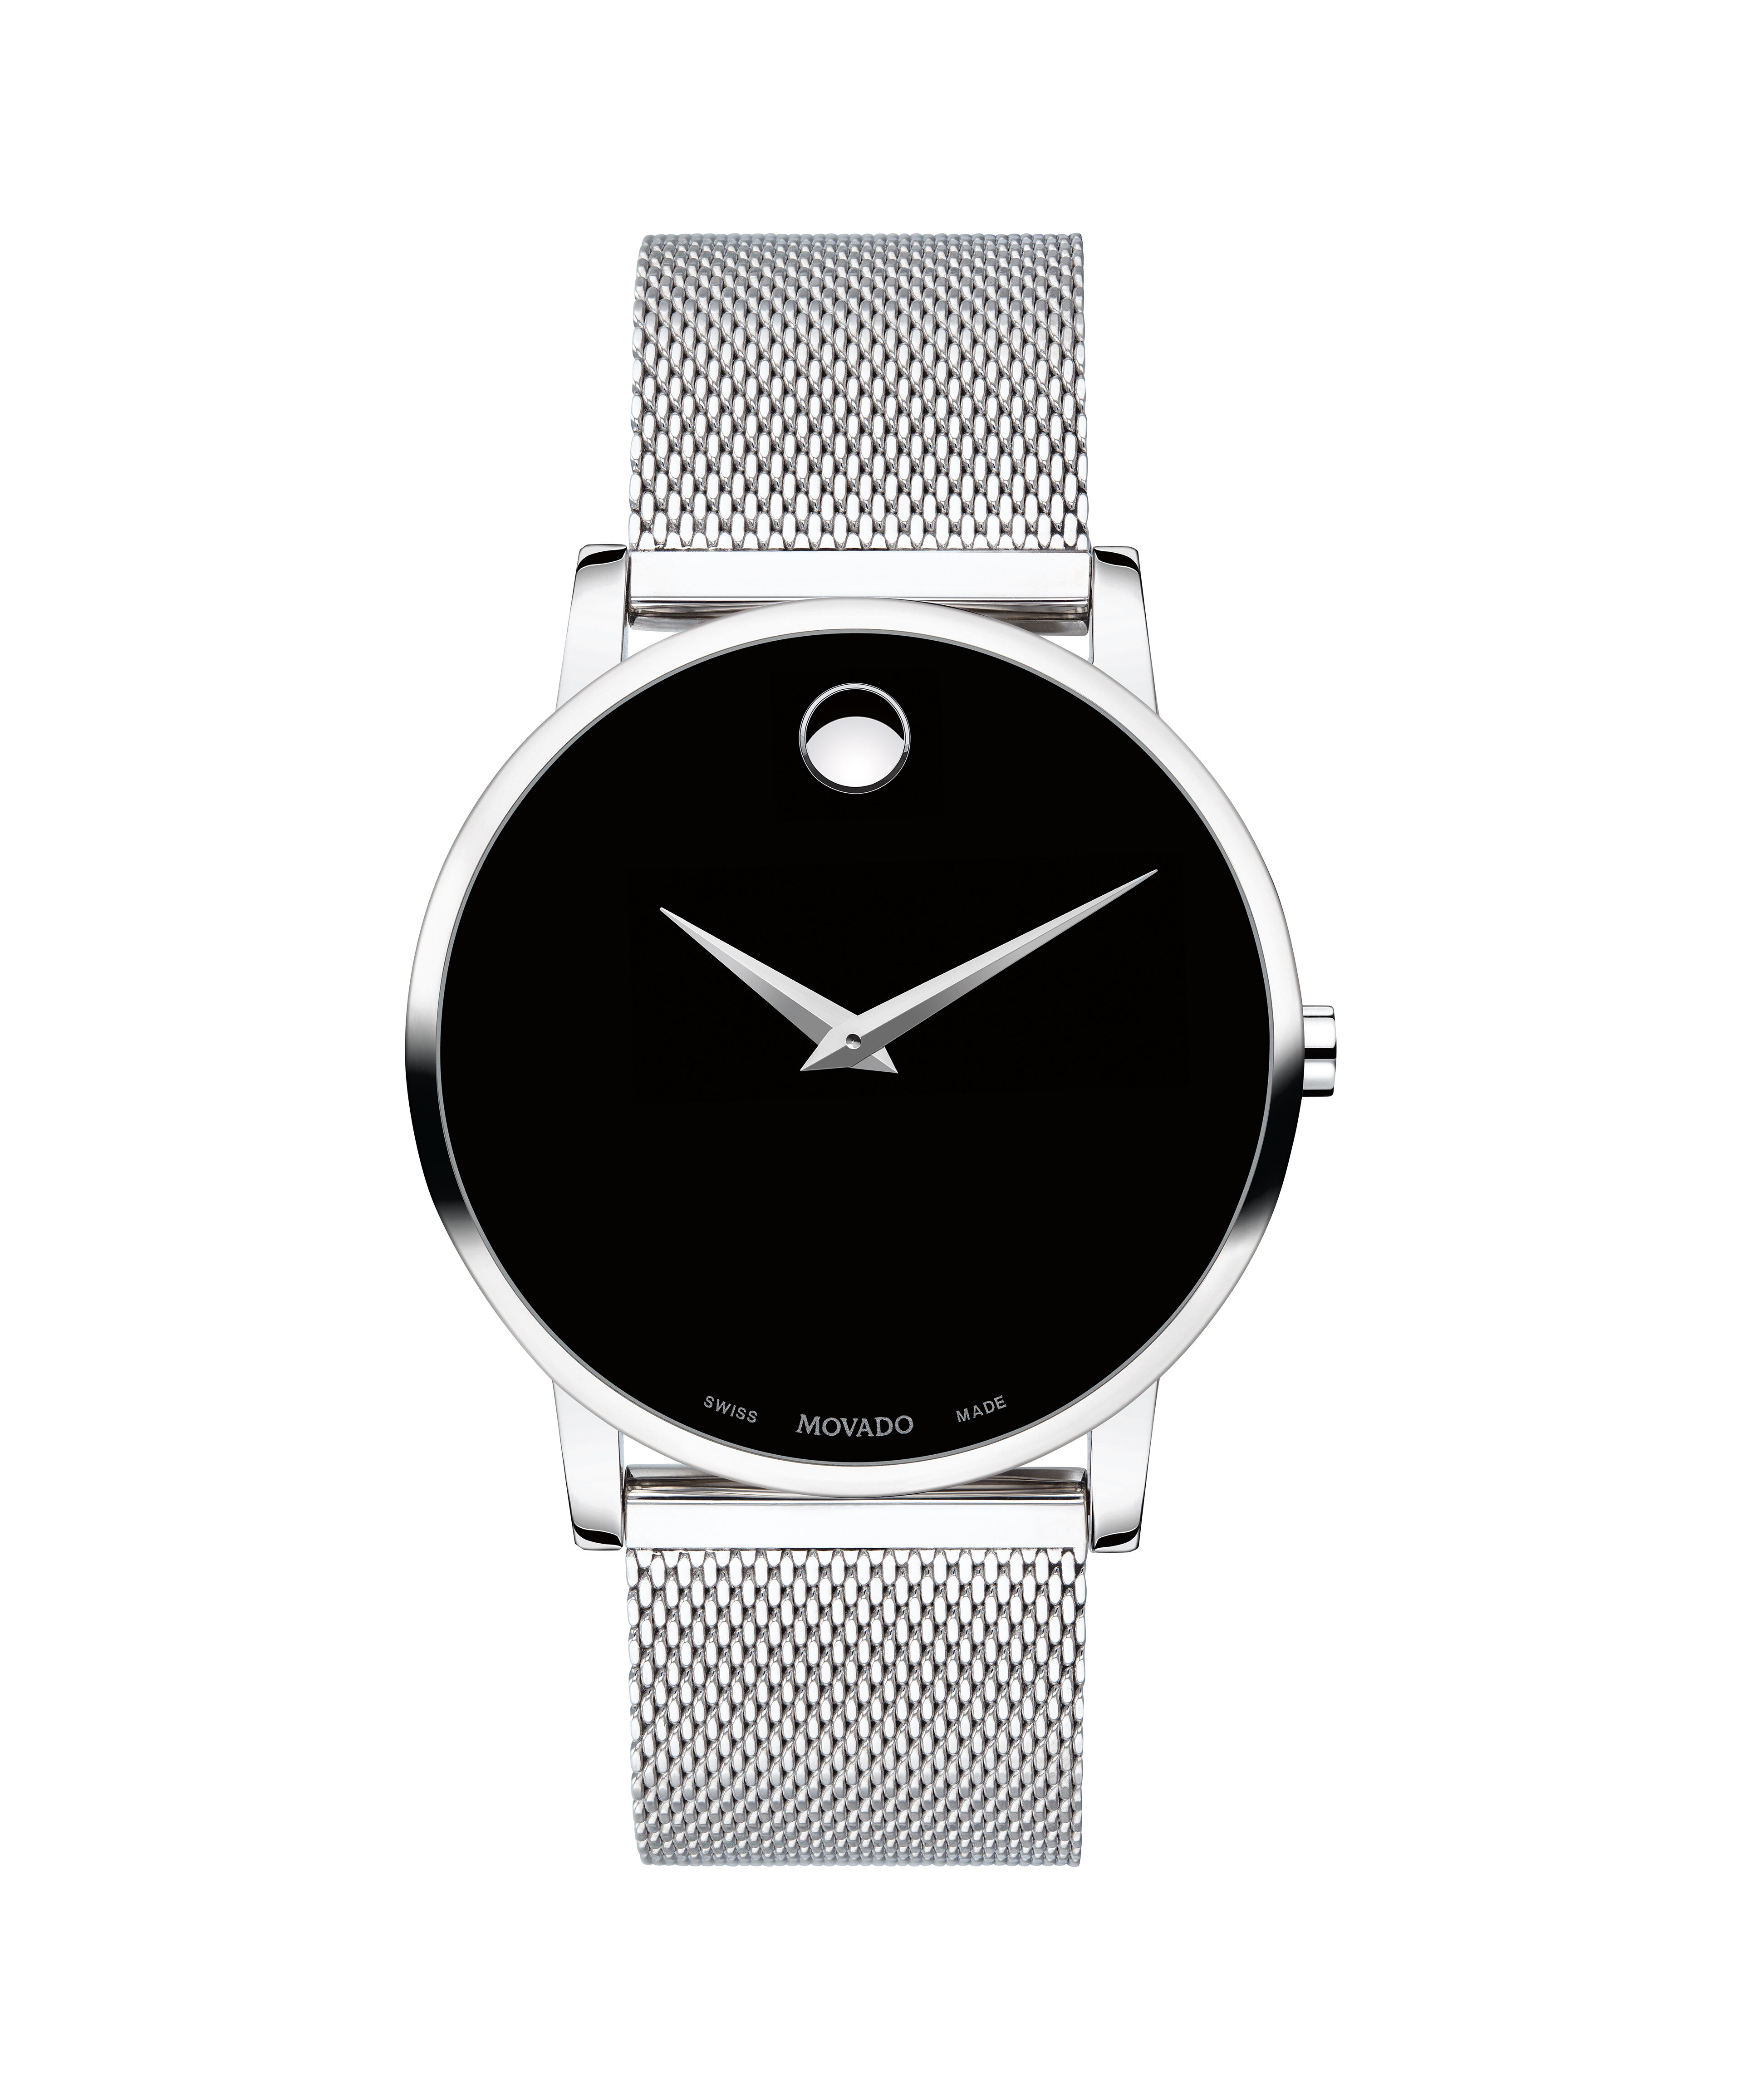 Movado Classic 5120 14k White Gold 27mm watch